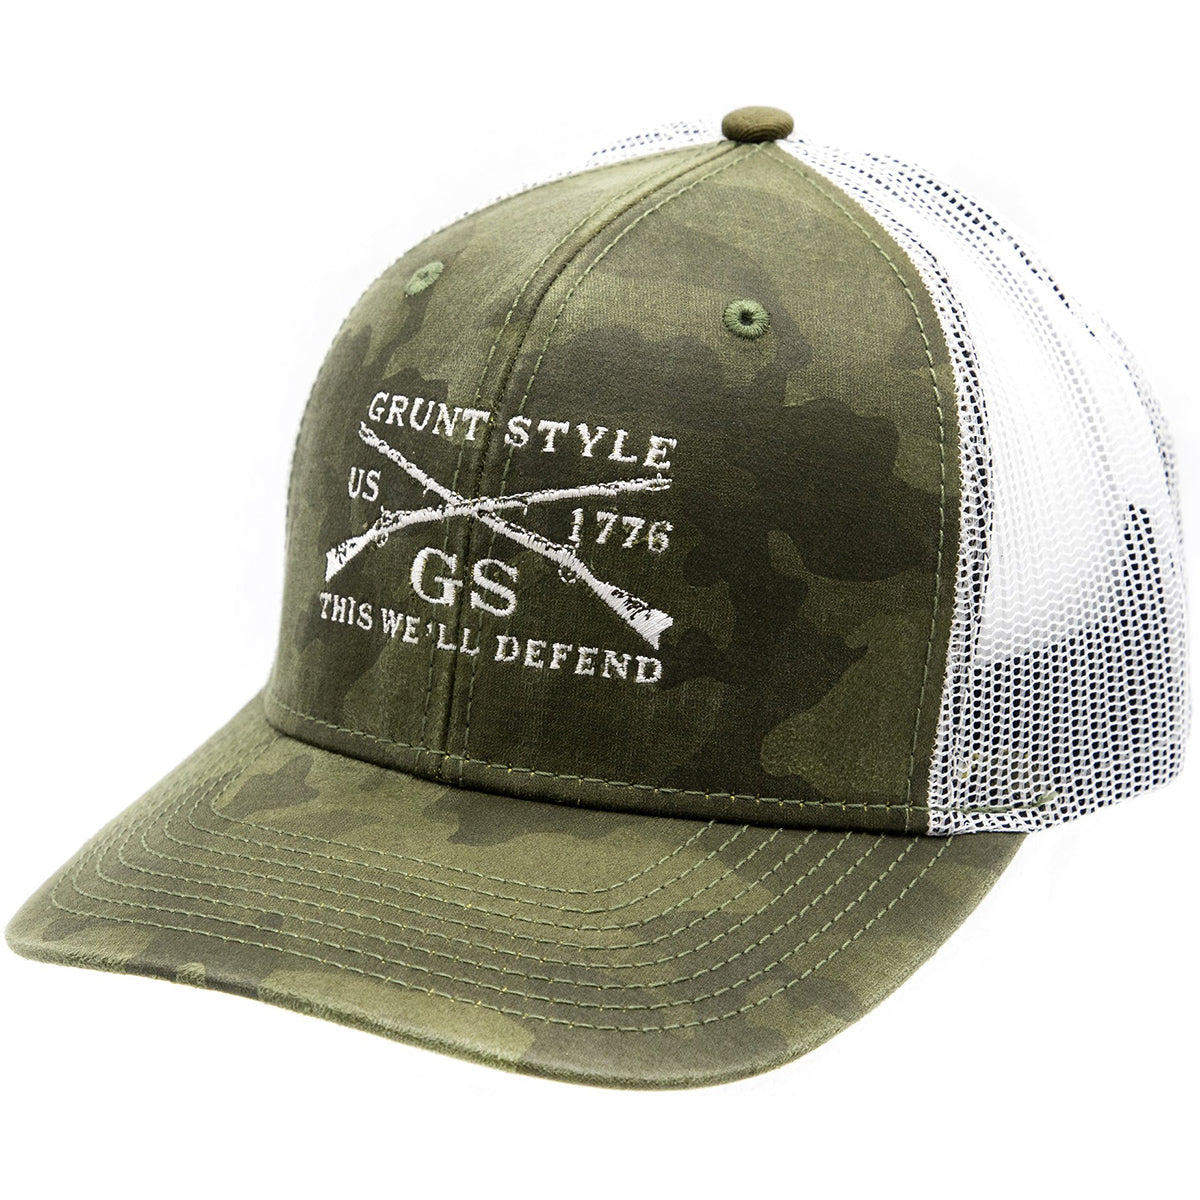 Grunt Style Embroidered Logo Hat - Camo Grunt Style